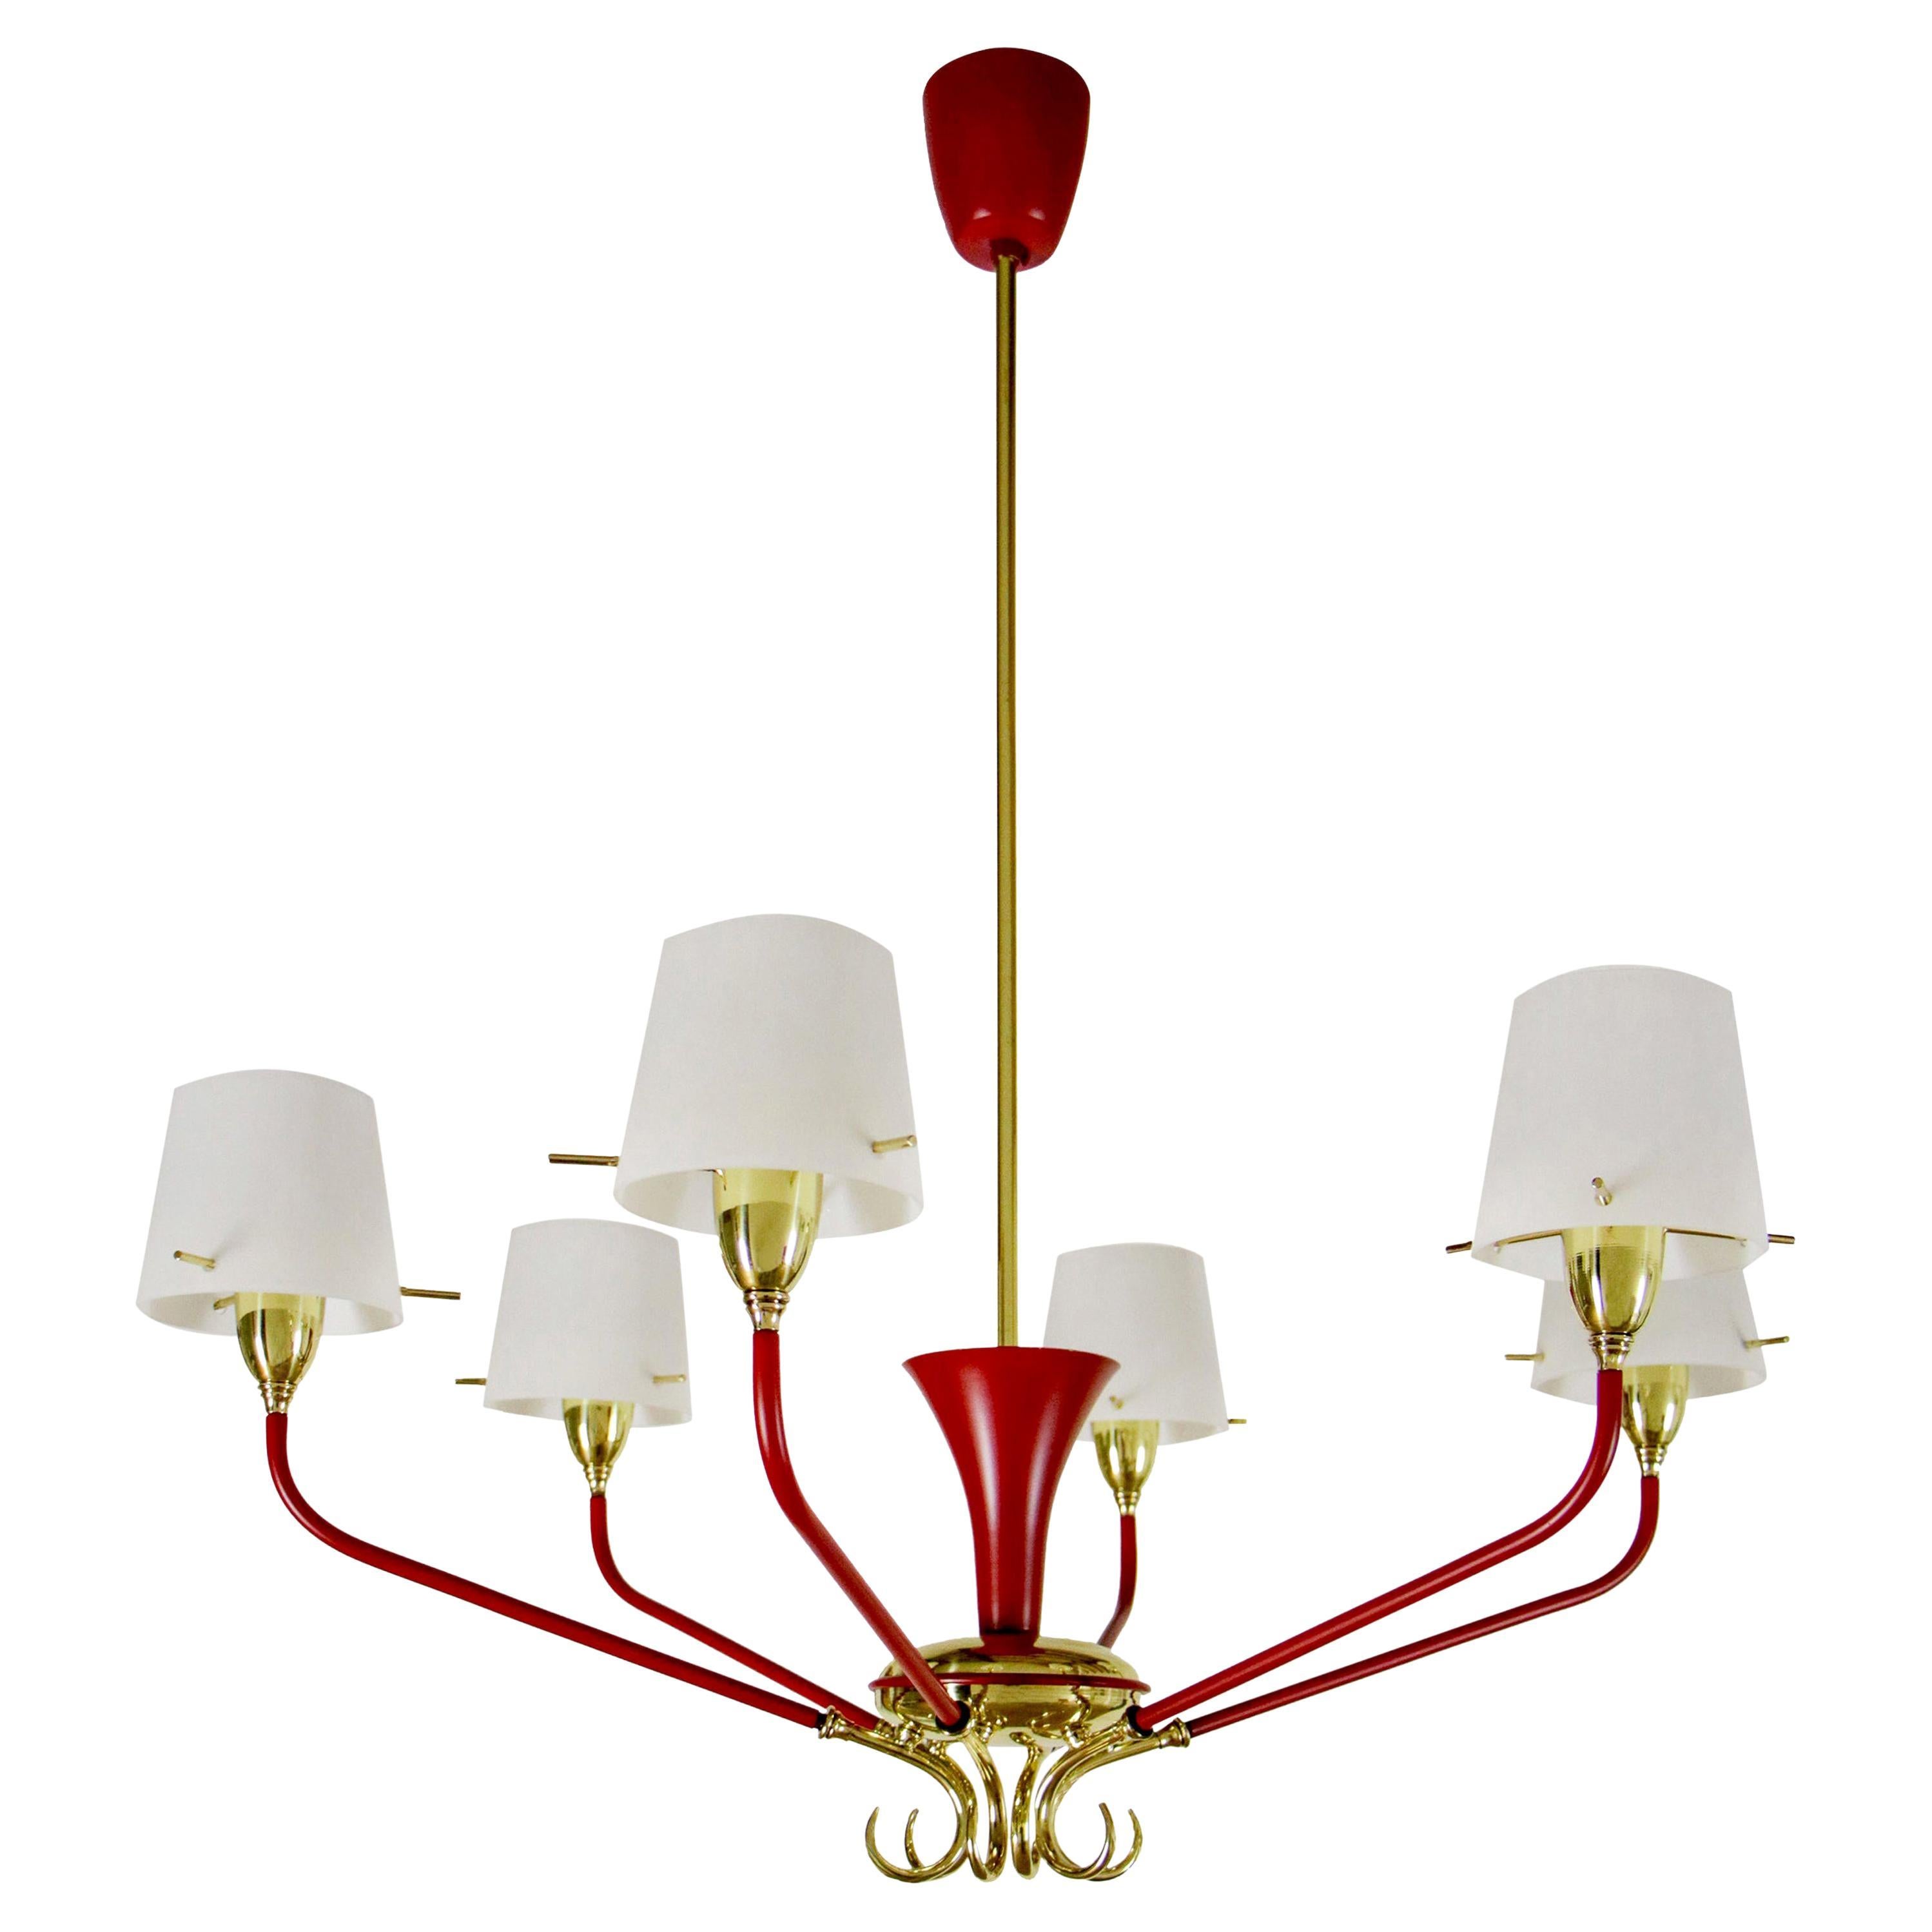 Italian Mid-Century Red Gold Six Lights Chandelier Attributed to Stilnovo, 1950s For Sale